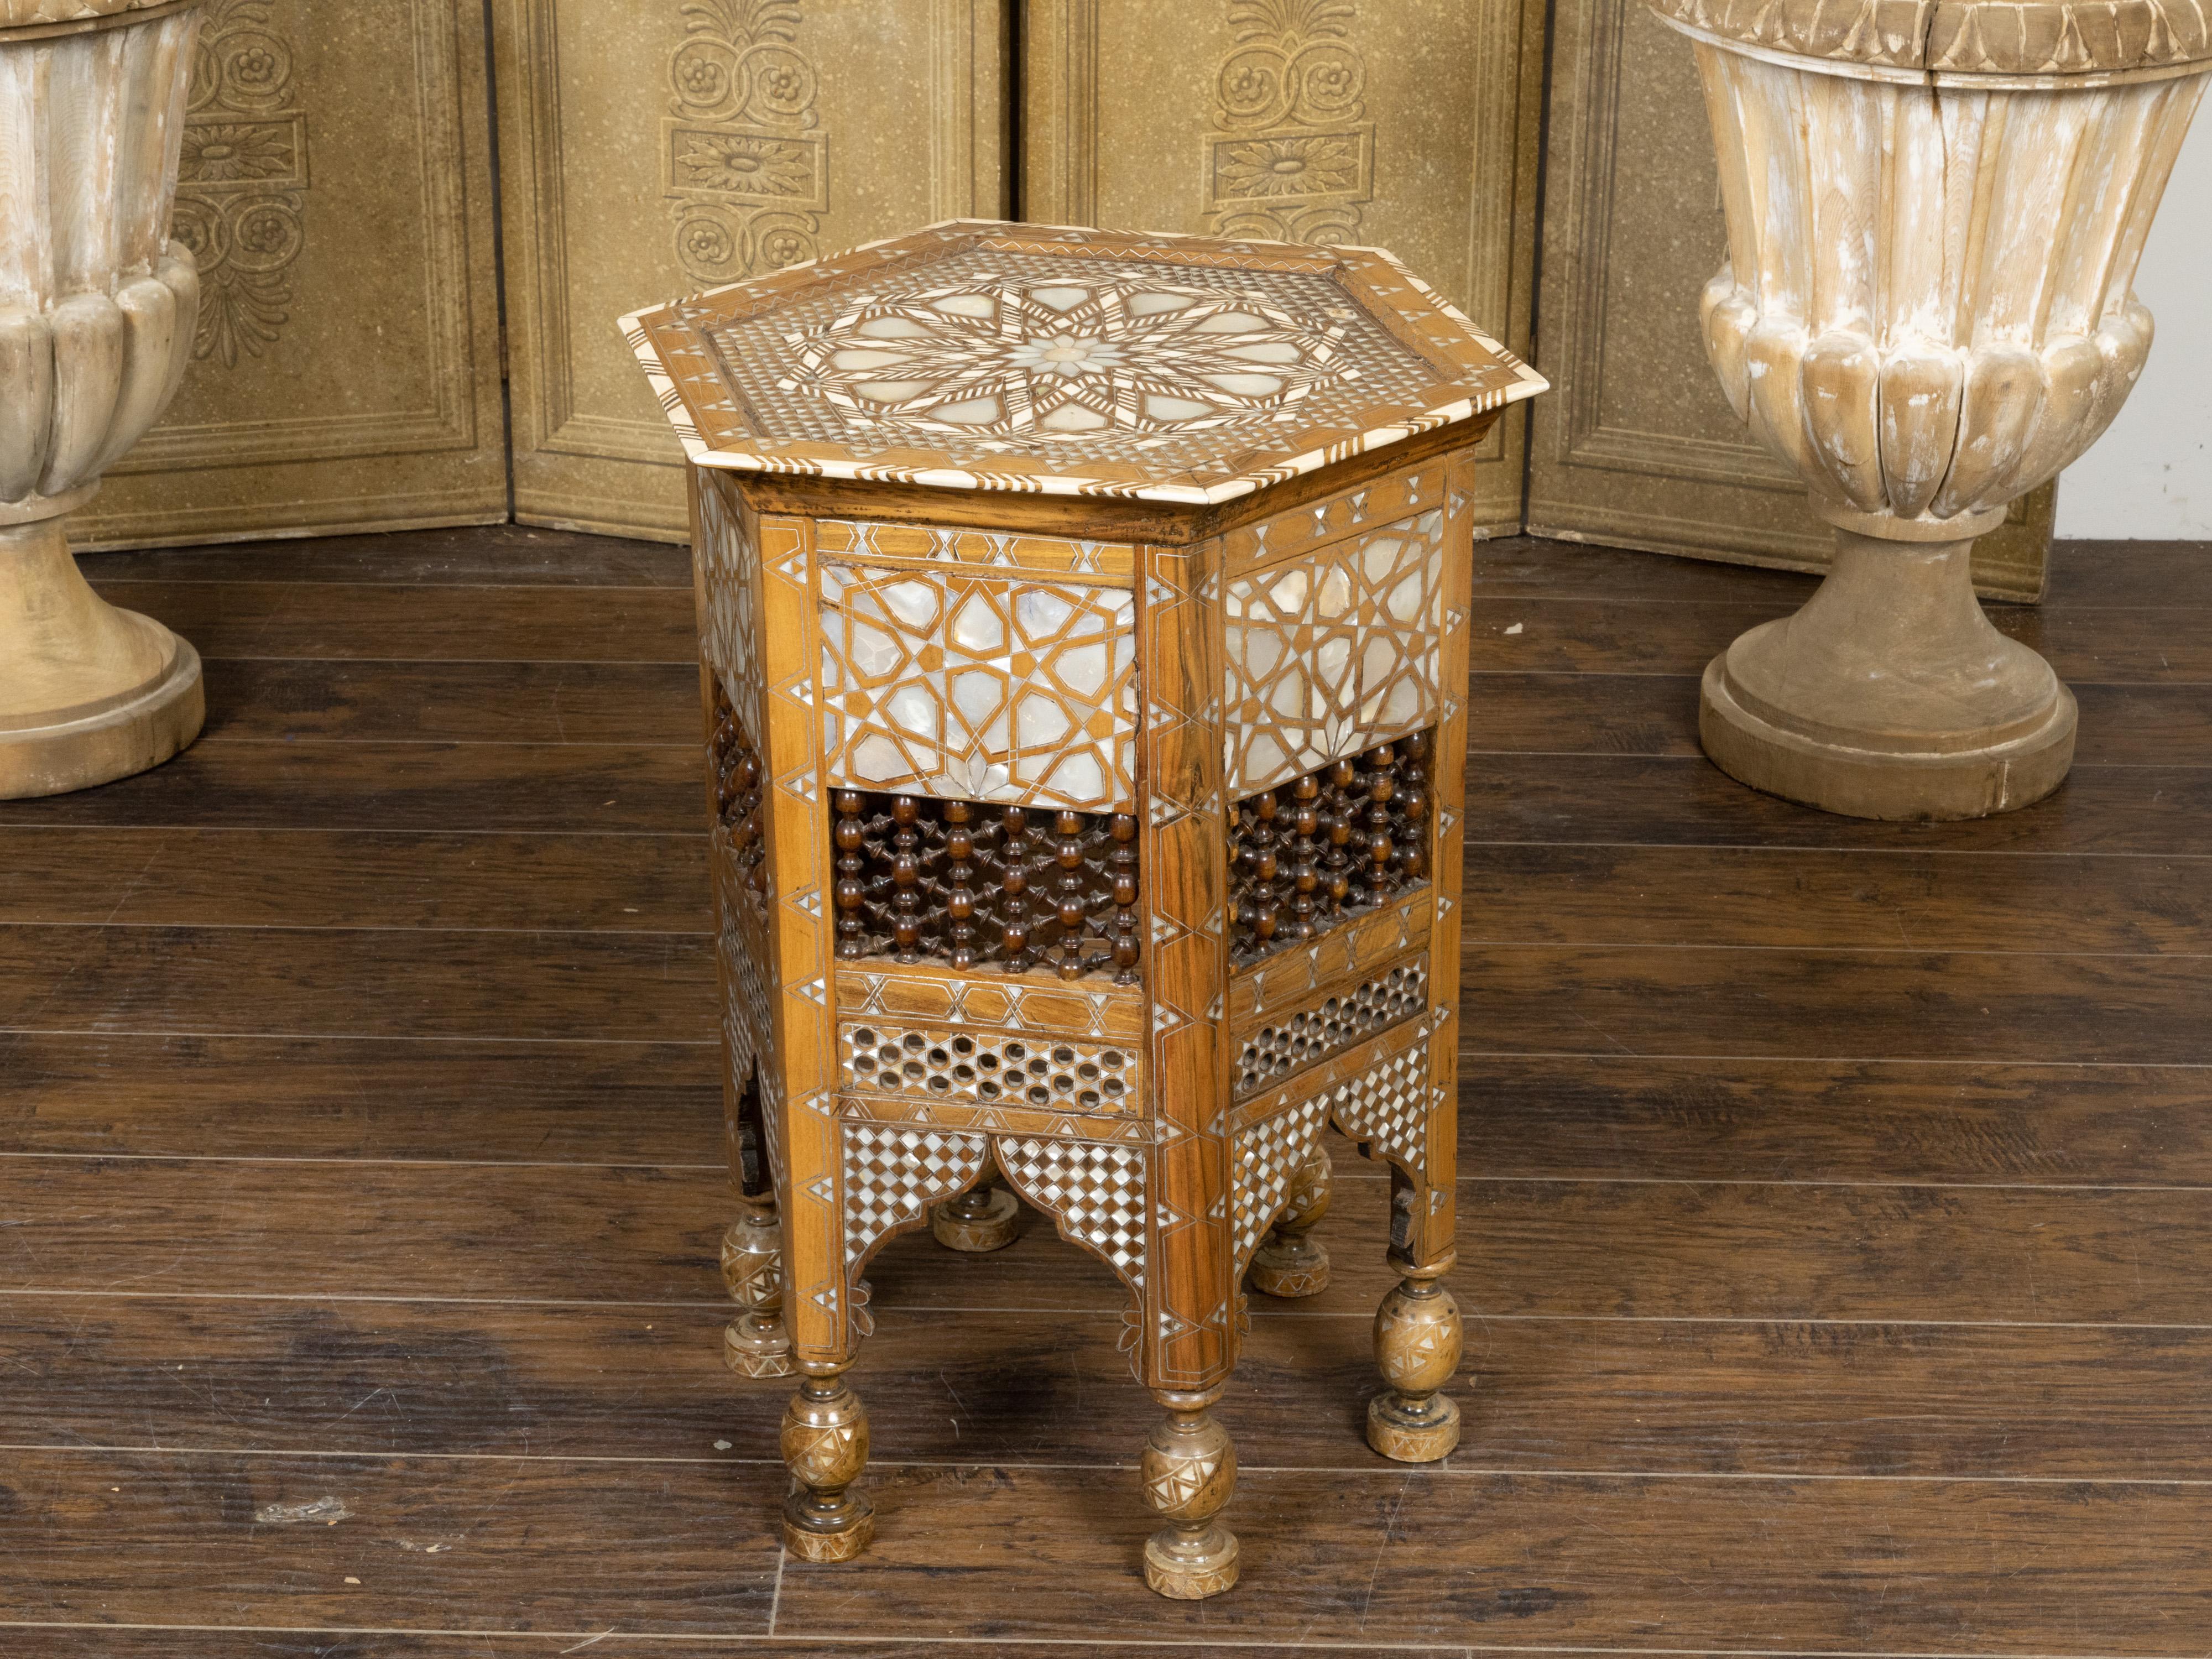 20th Century Moroccan Moorish Style 1920s Table with Hexagonal Top and Mother of Pearl Inlay